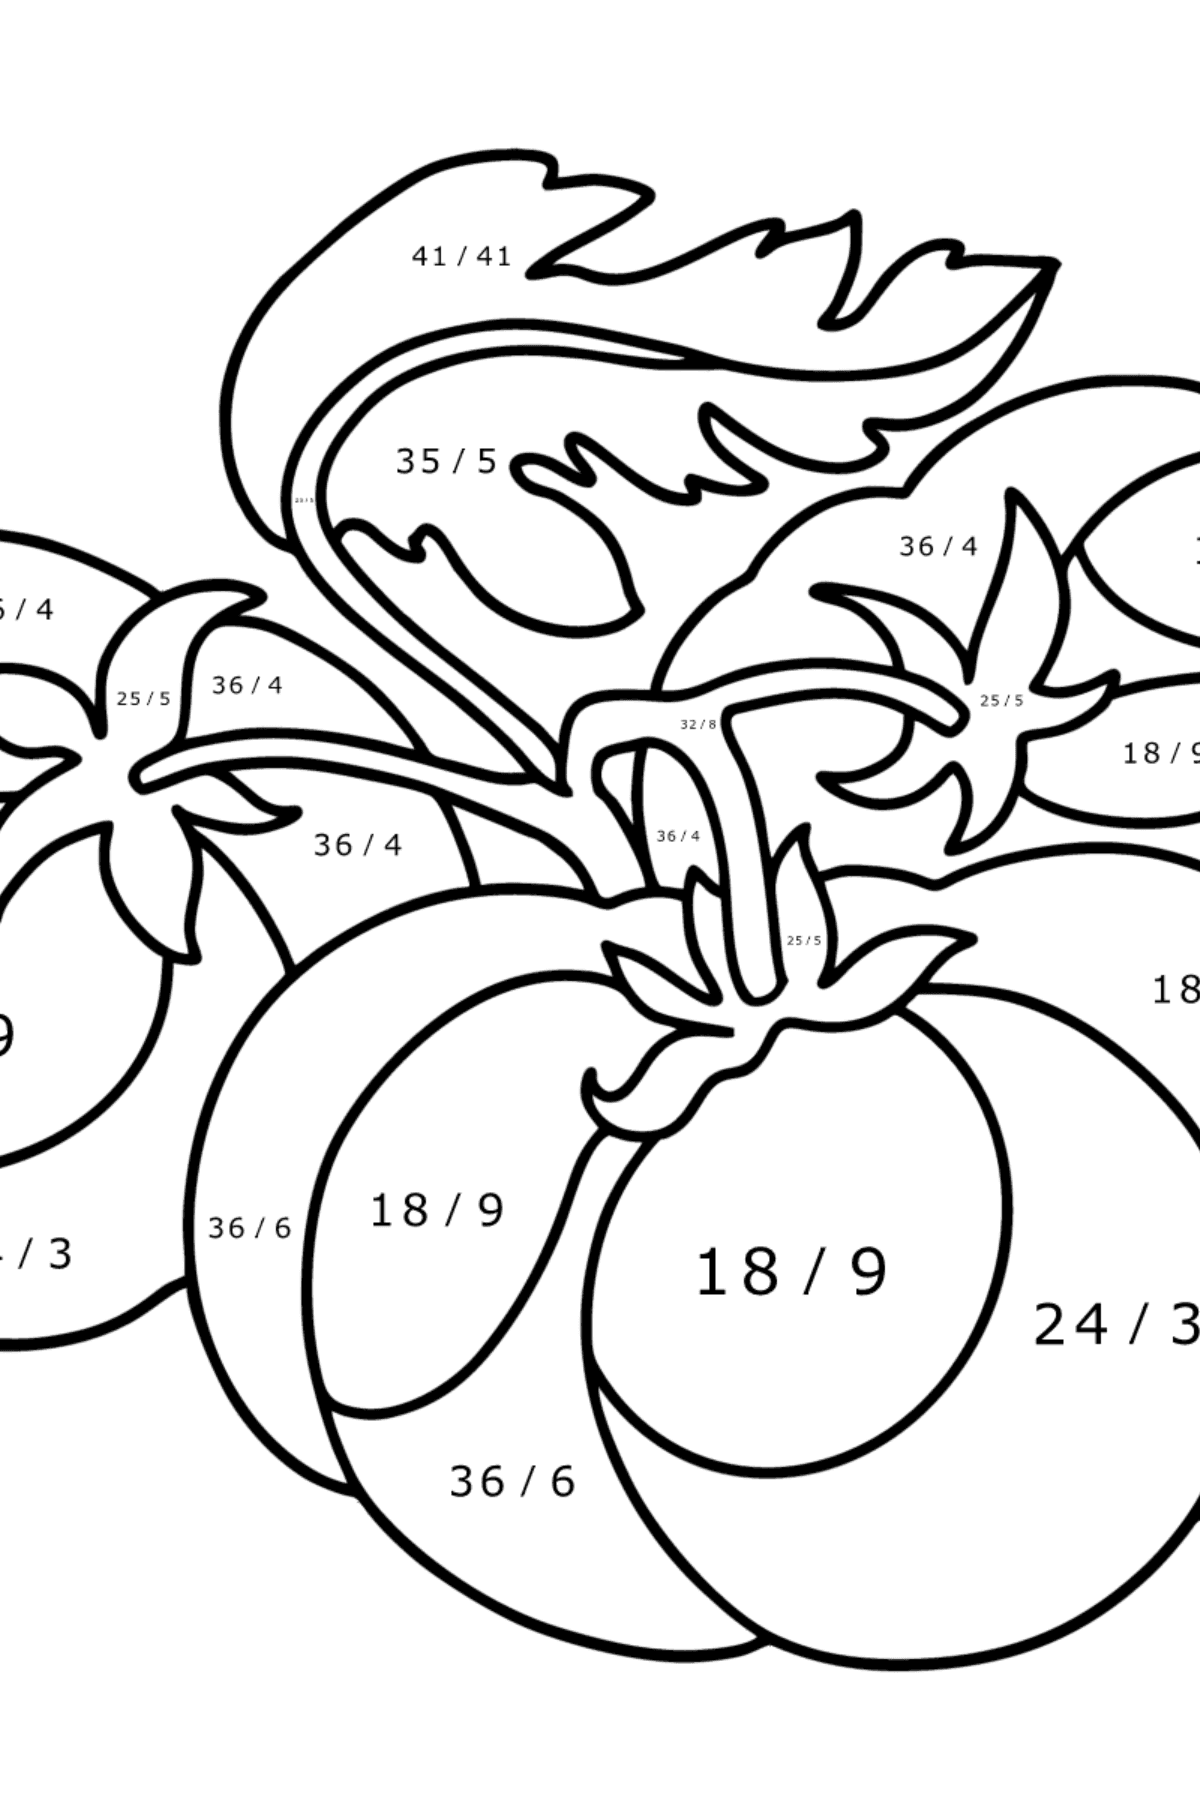 Large tomatoes сoloring page - Math Coloring - Division for Kids